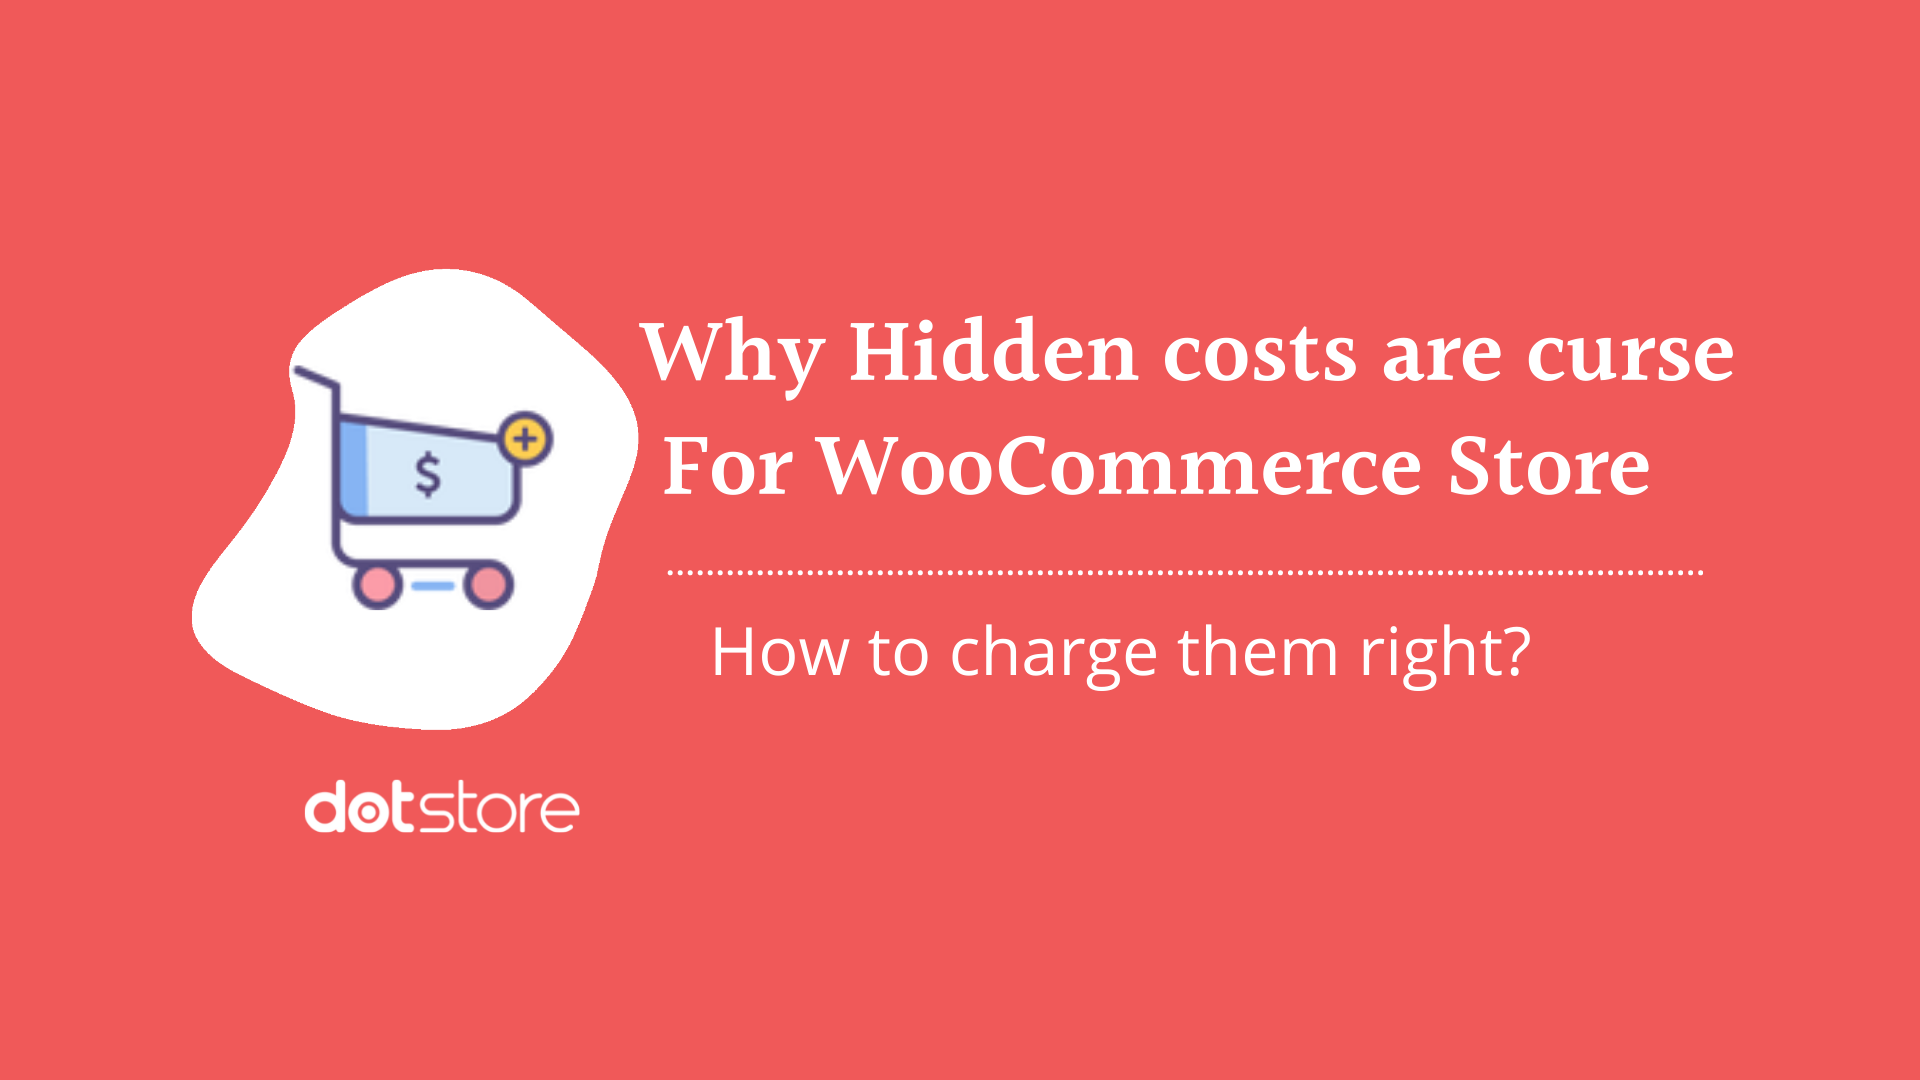 Why Hidden Costs are Curse for stores and how to Charge them right?